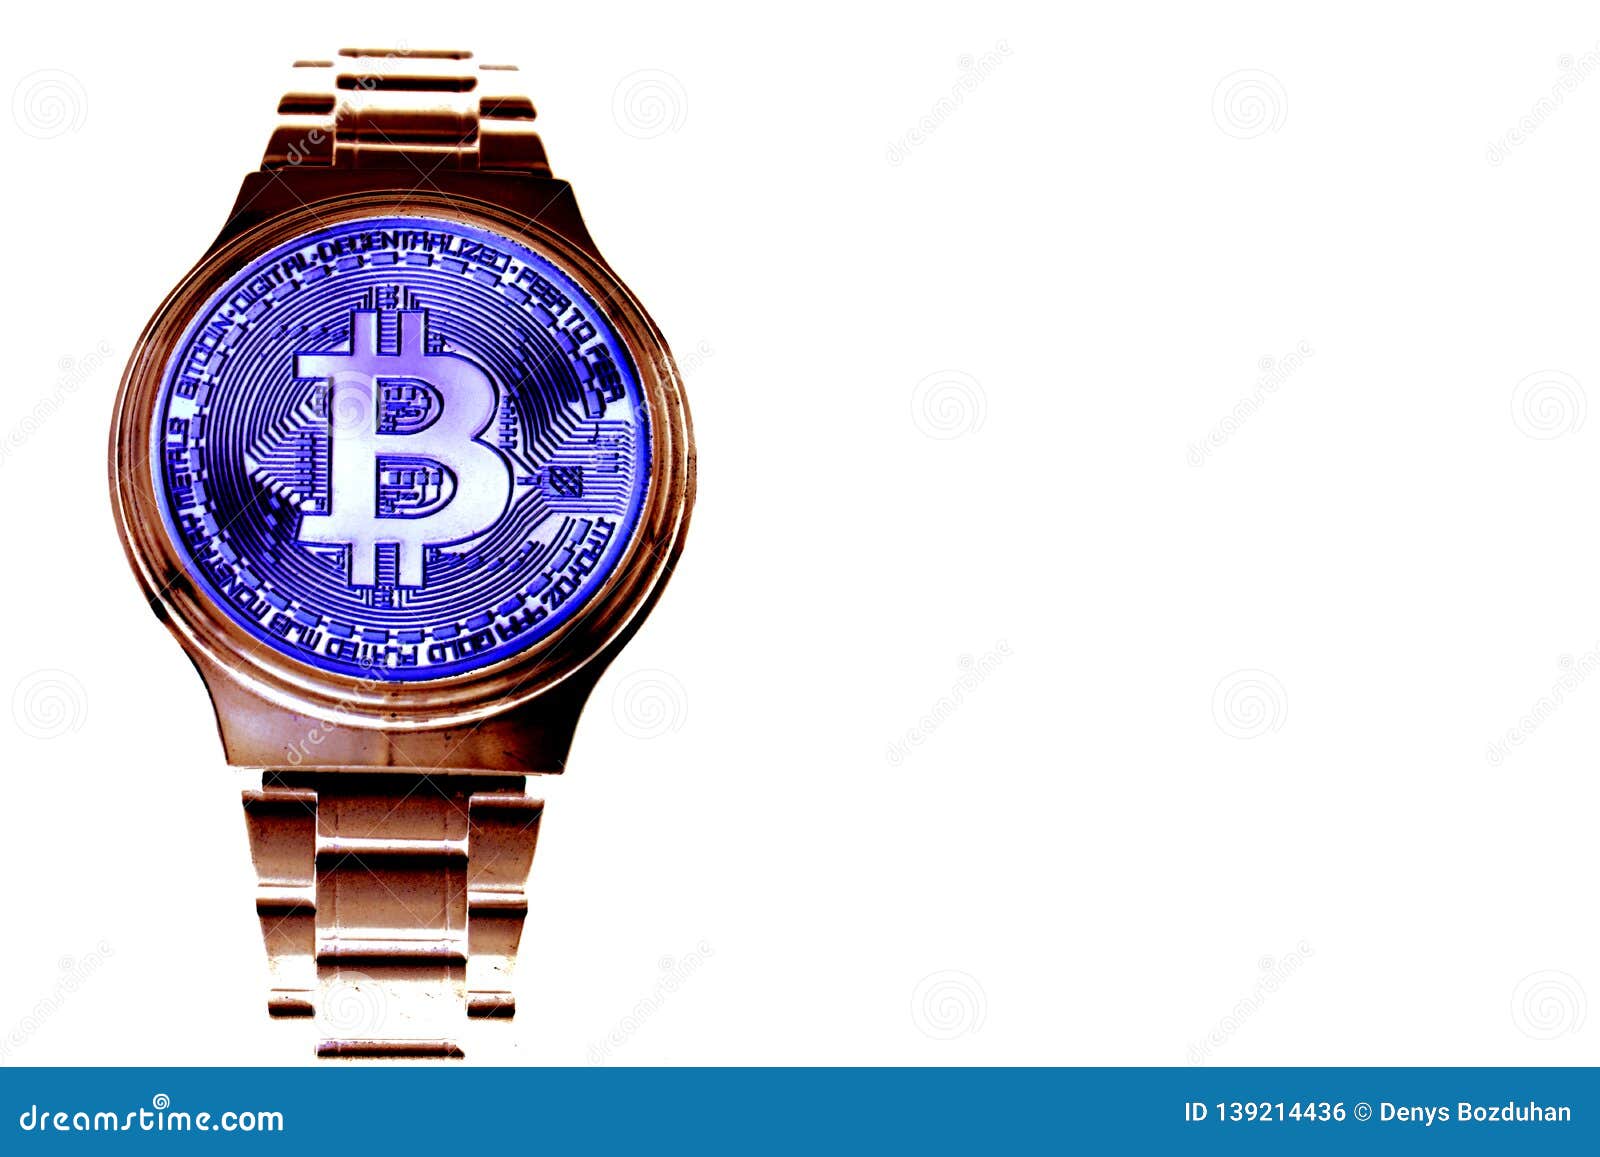 How To Earn And Trade Bitcoin | Earn Bitcoins Viewing Websites